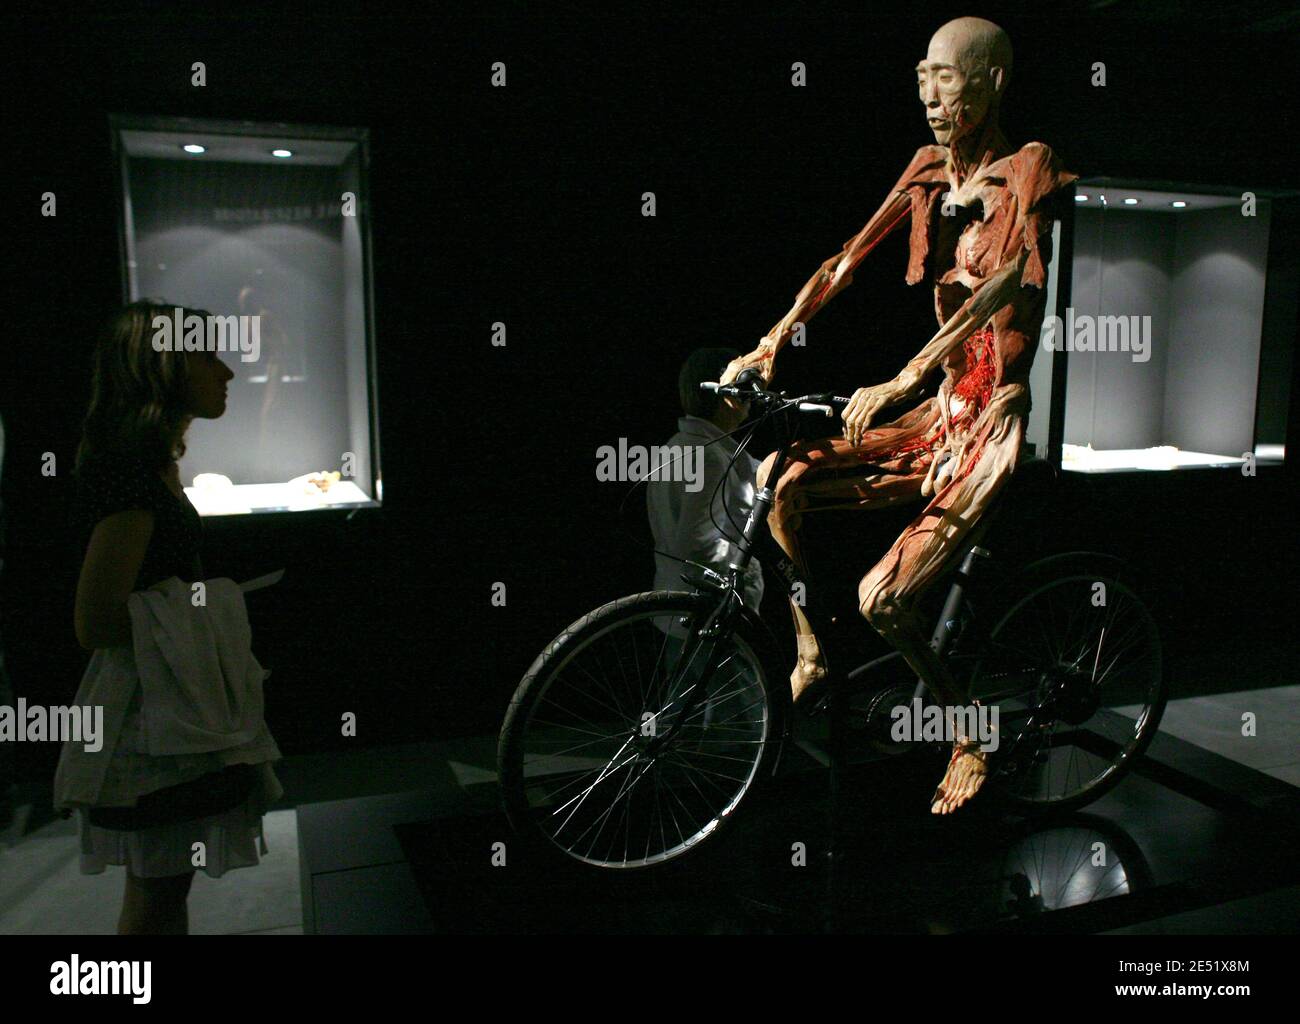 'Our Body exhibition in Lyon, France on May 29, 2008. Consisting of actual human bodies and organs this exhibit literally goes ''under the skin'', revealing the mysteries of the human anatomy. The bodies, specimens and organs have been preserved using a process known as polymer impregnation. Photos by Vincent Dargent/ABACAPRESS.COM' Stock Photo